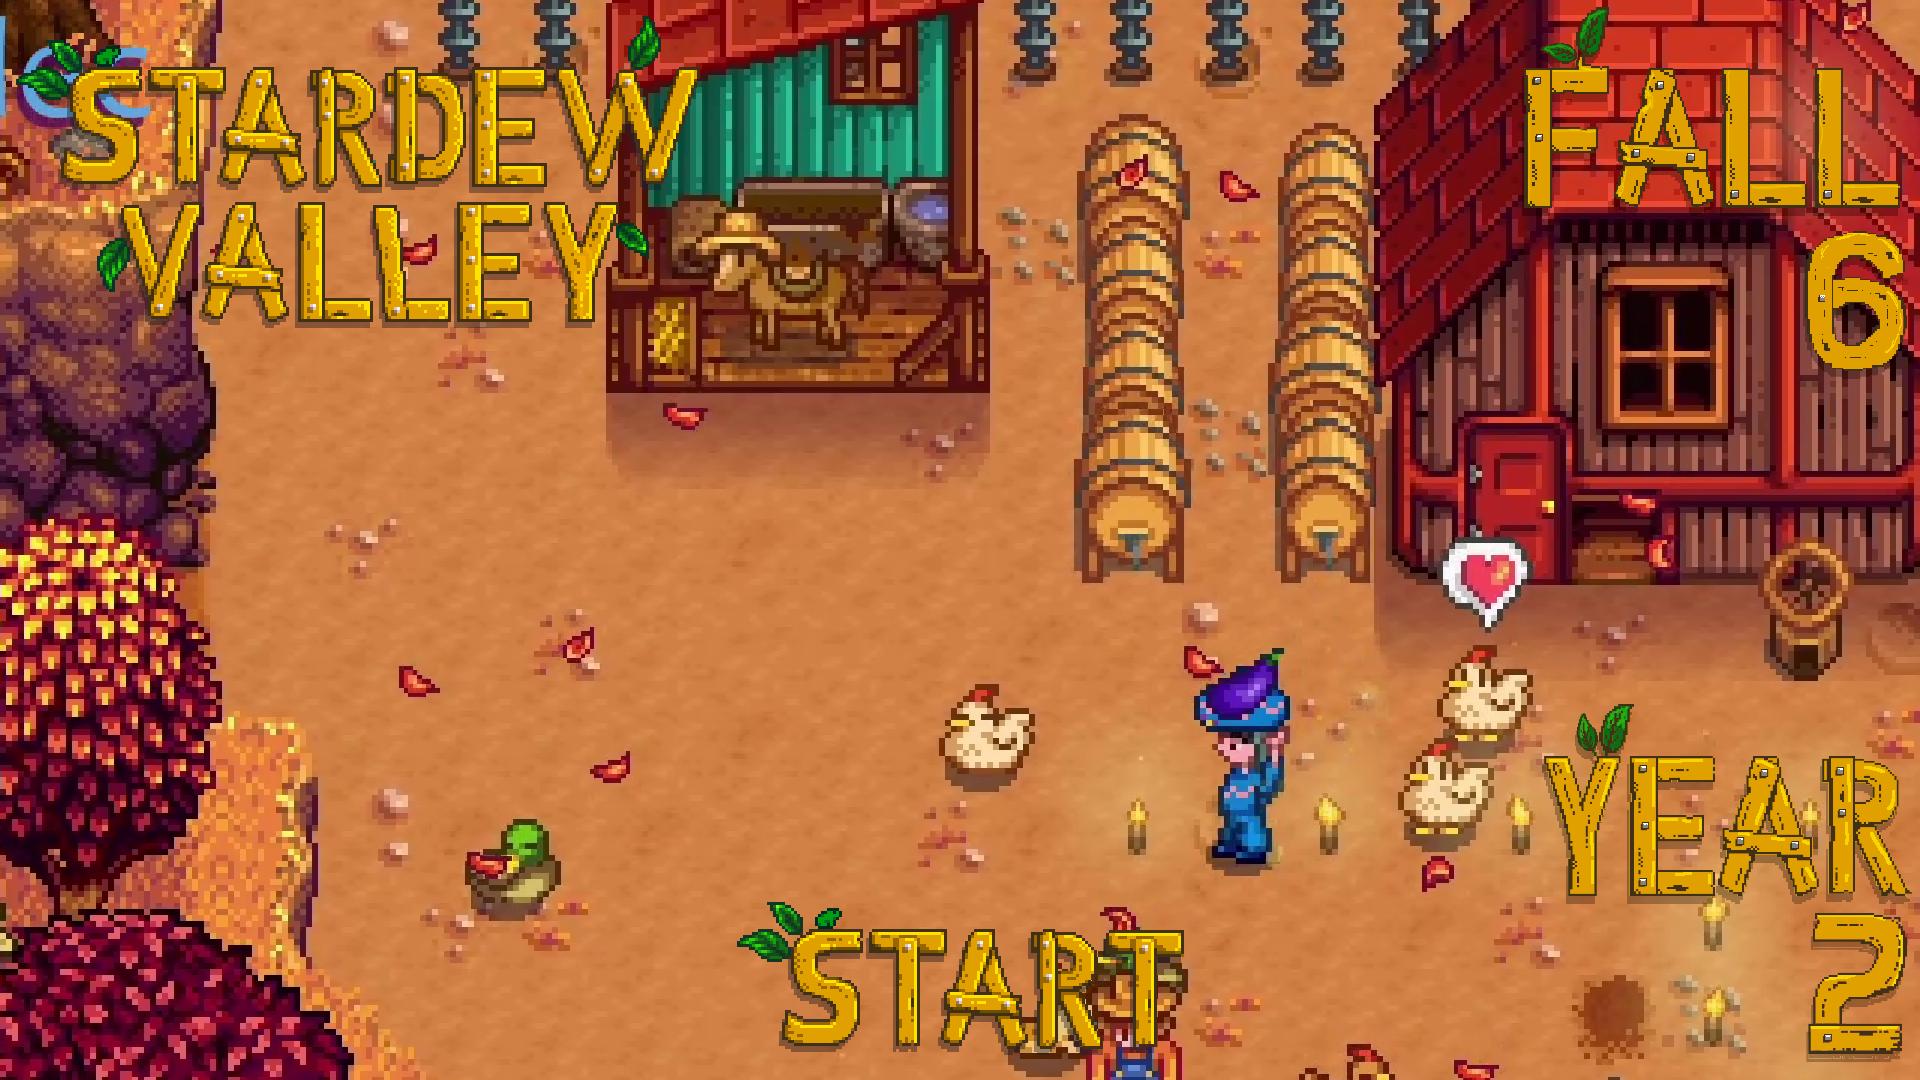 The Brewery – Stardew Valley, Fall 6, Year 2, Start